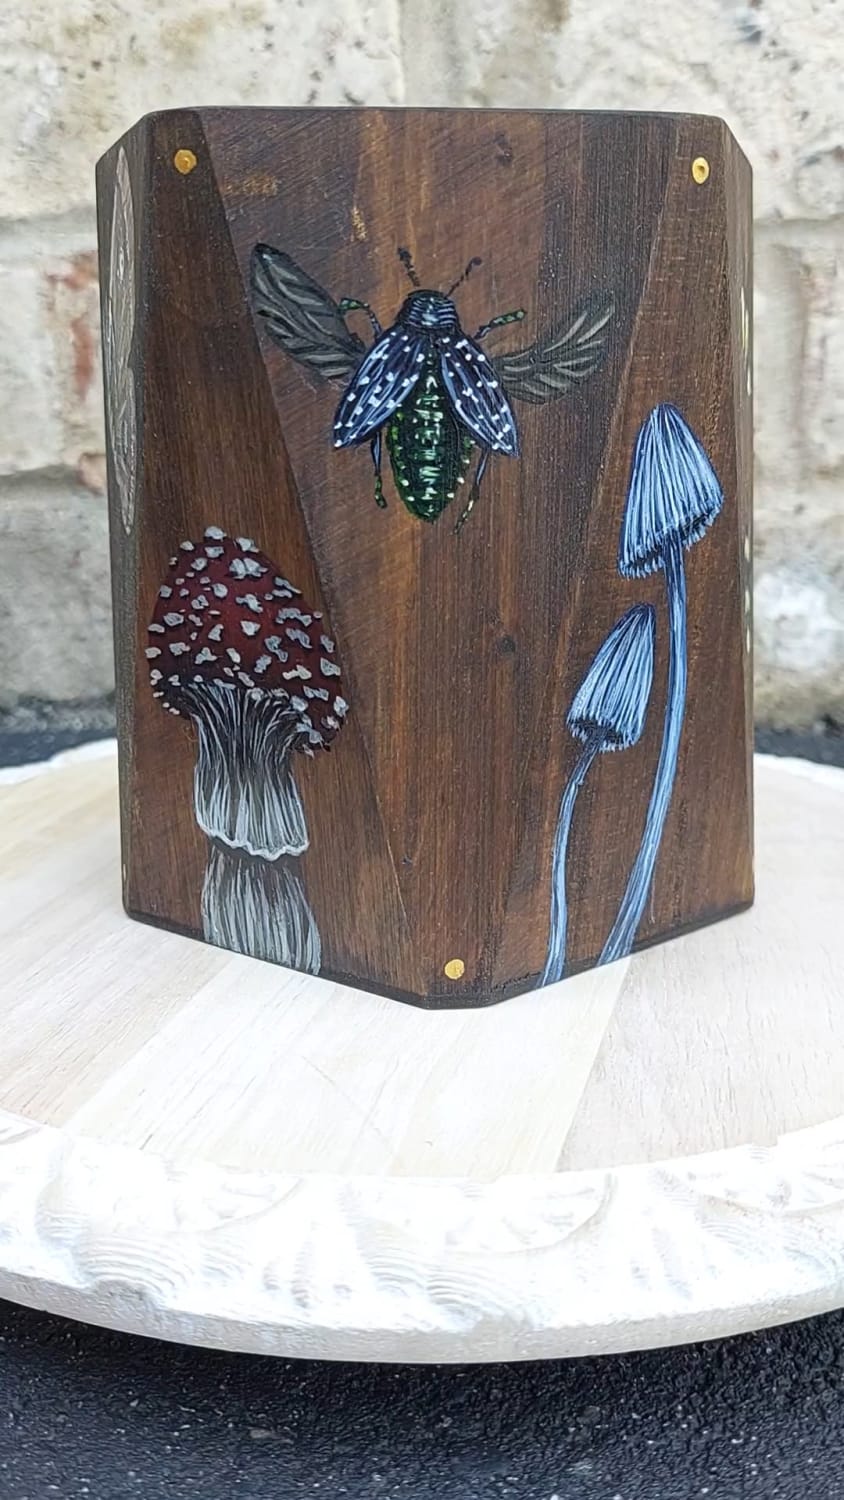 Mushrooms & Insects Pencil Holder: Acrylic Painting on Wood!